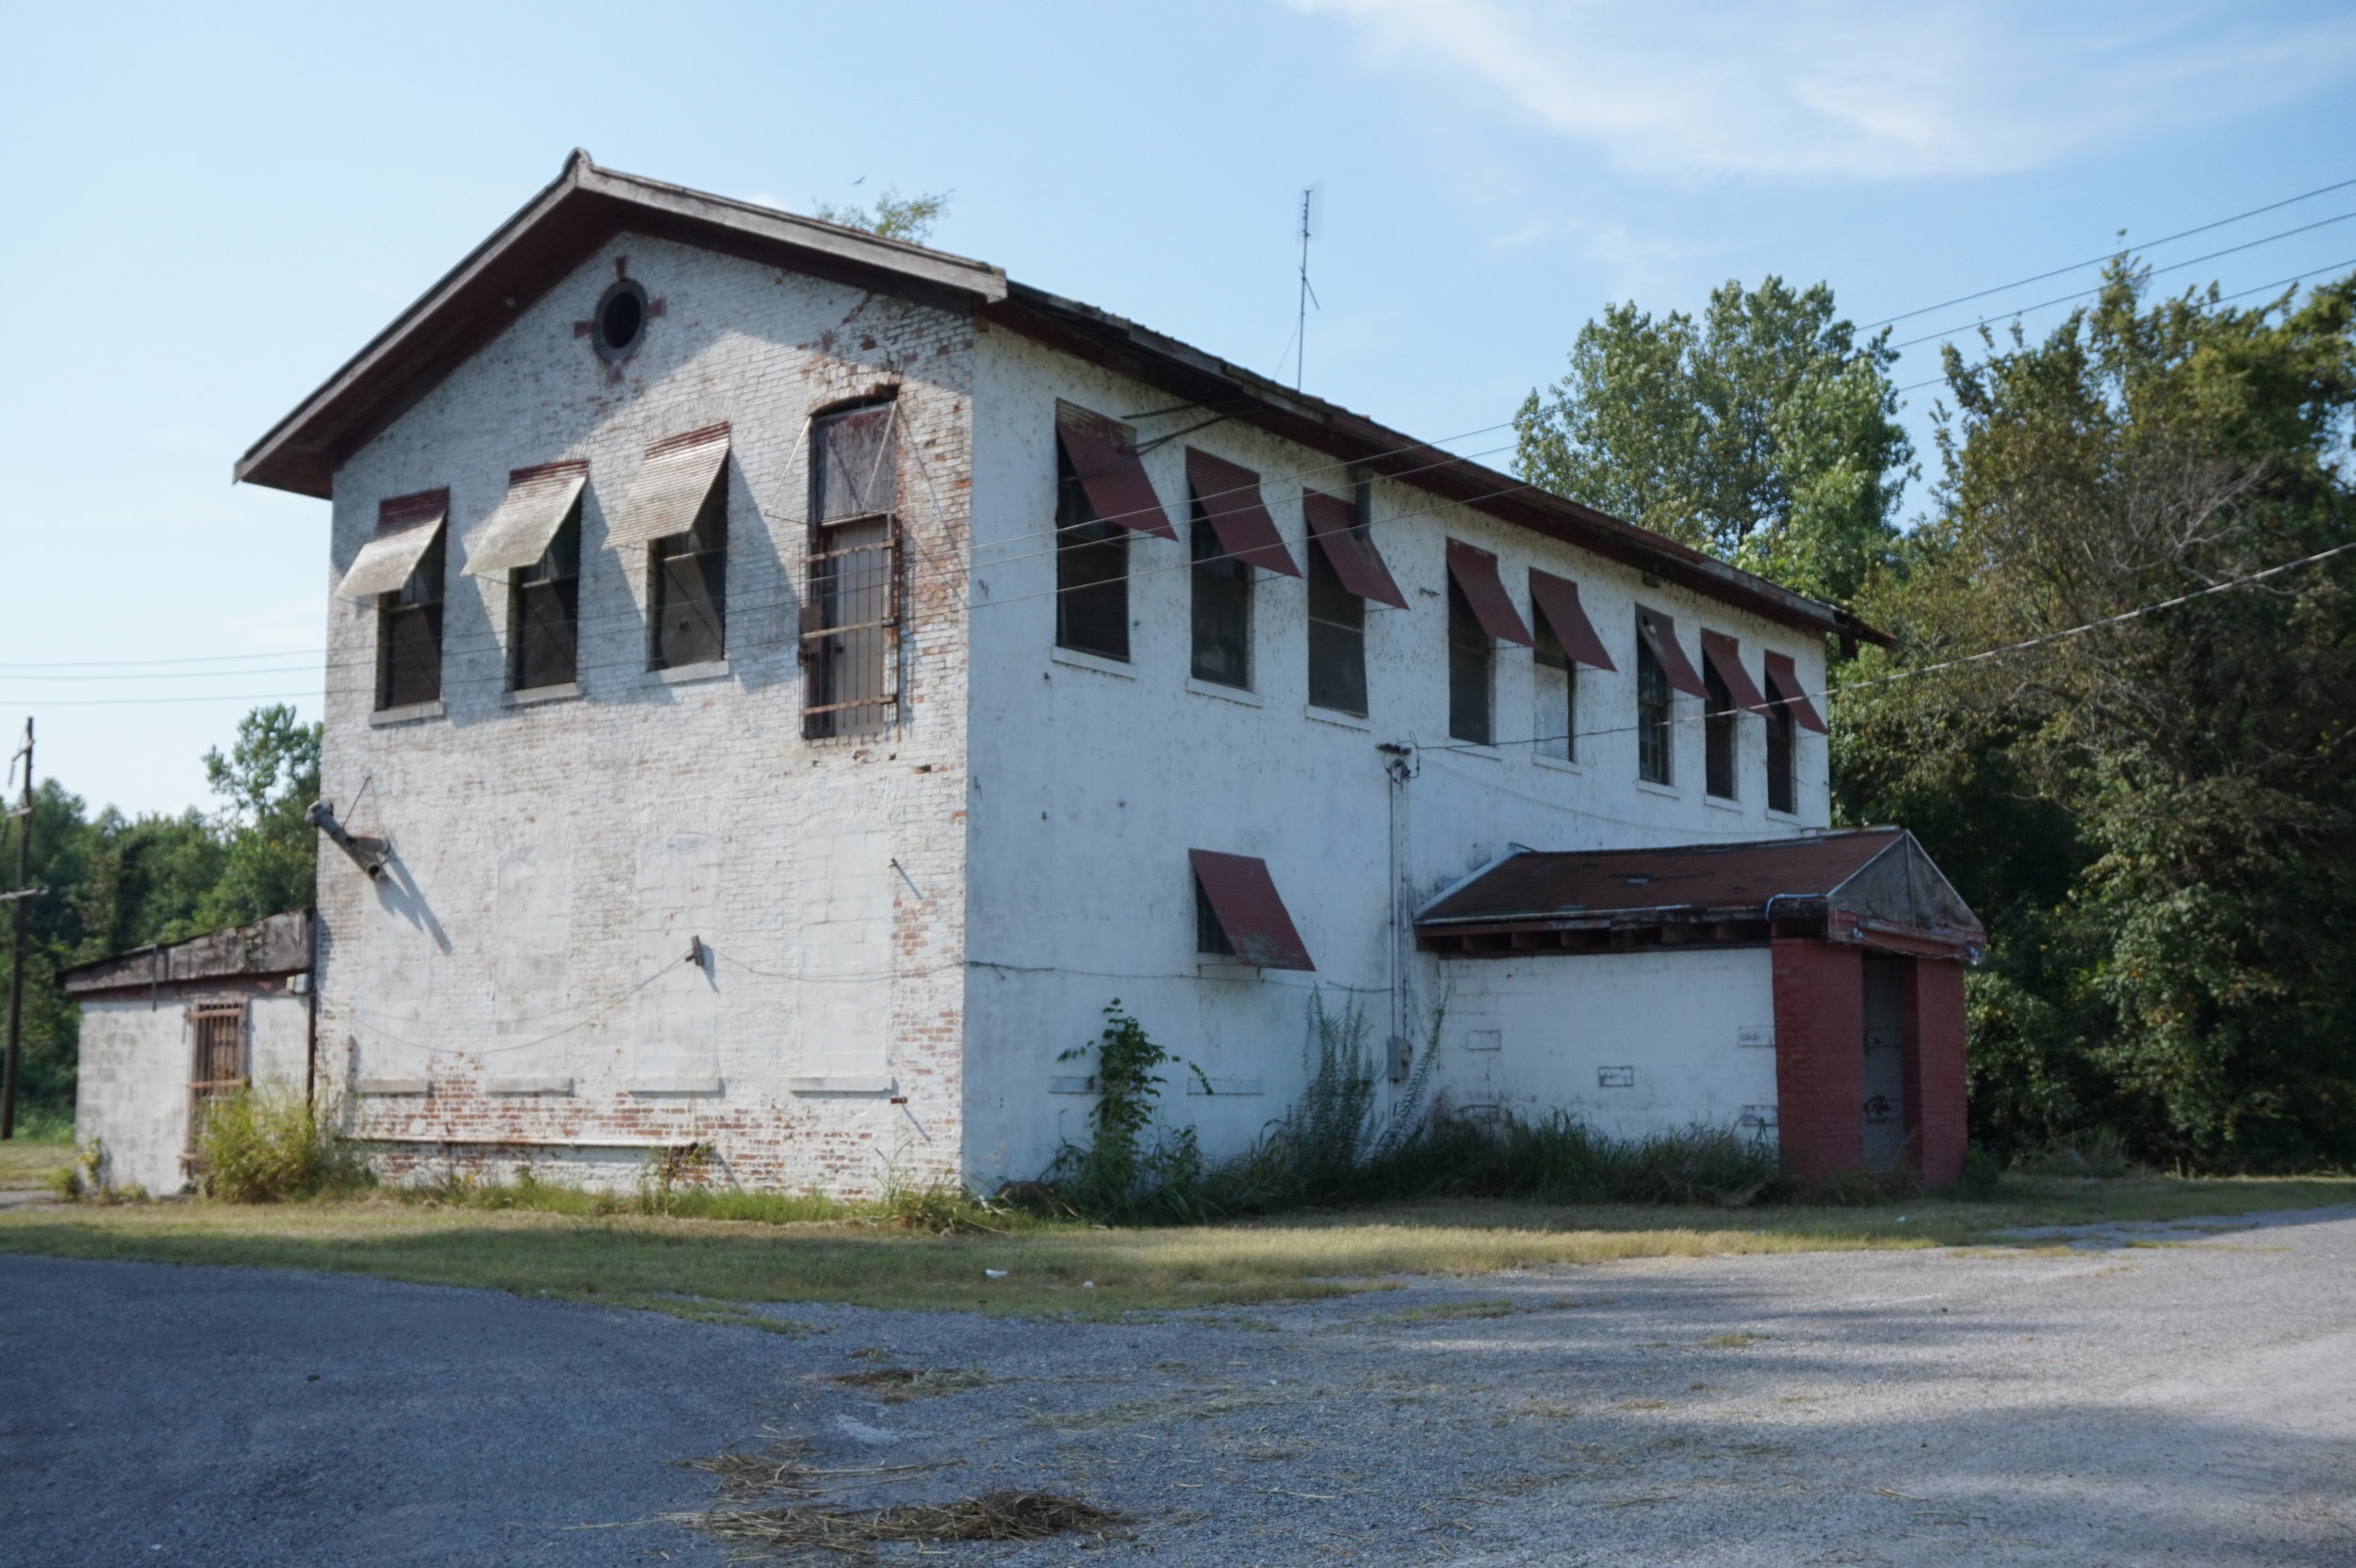  Abandoned tavern; this is the building that appears in most online references to Future City. 